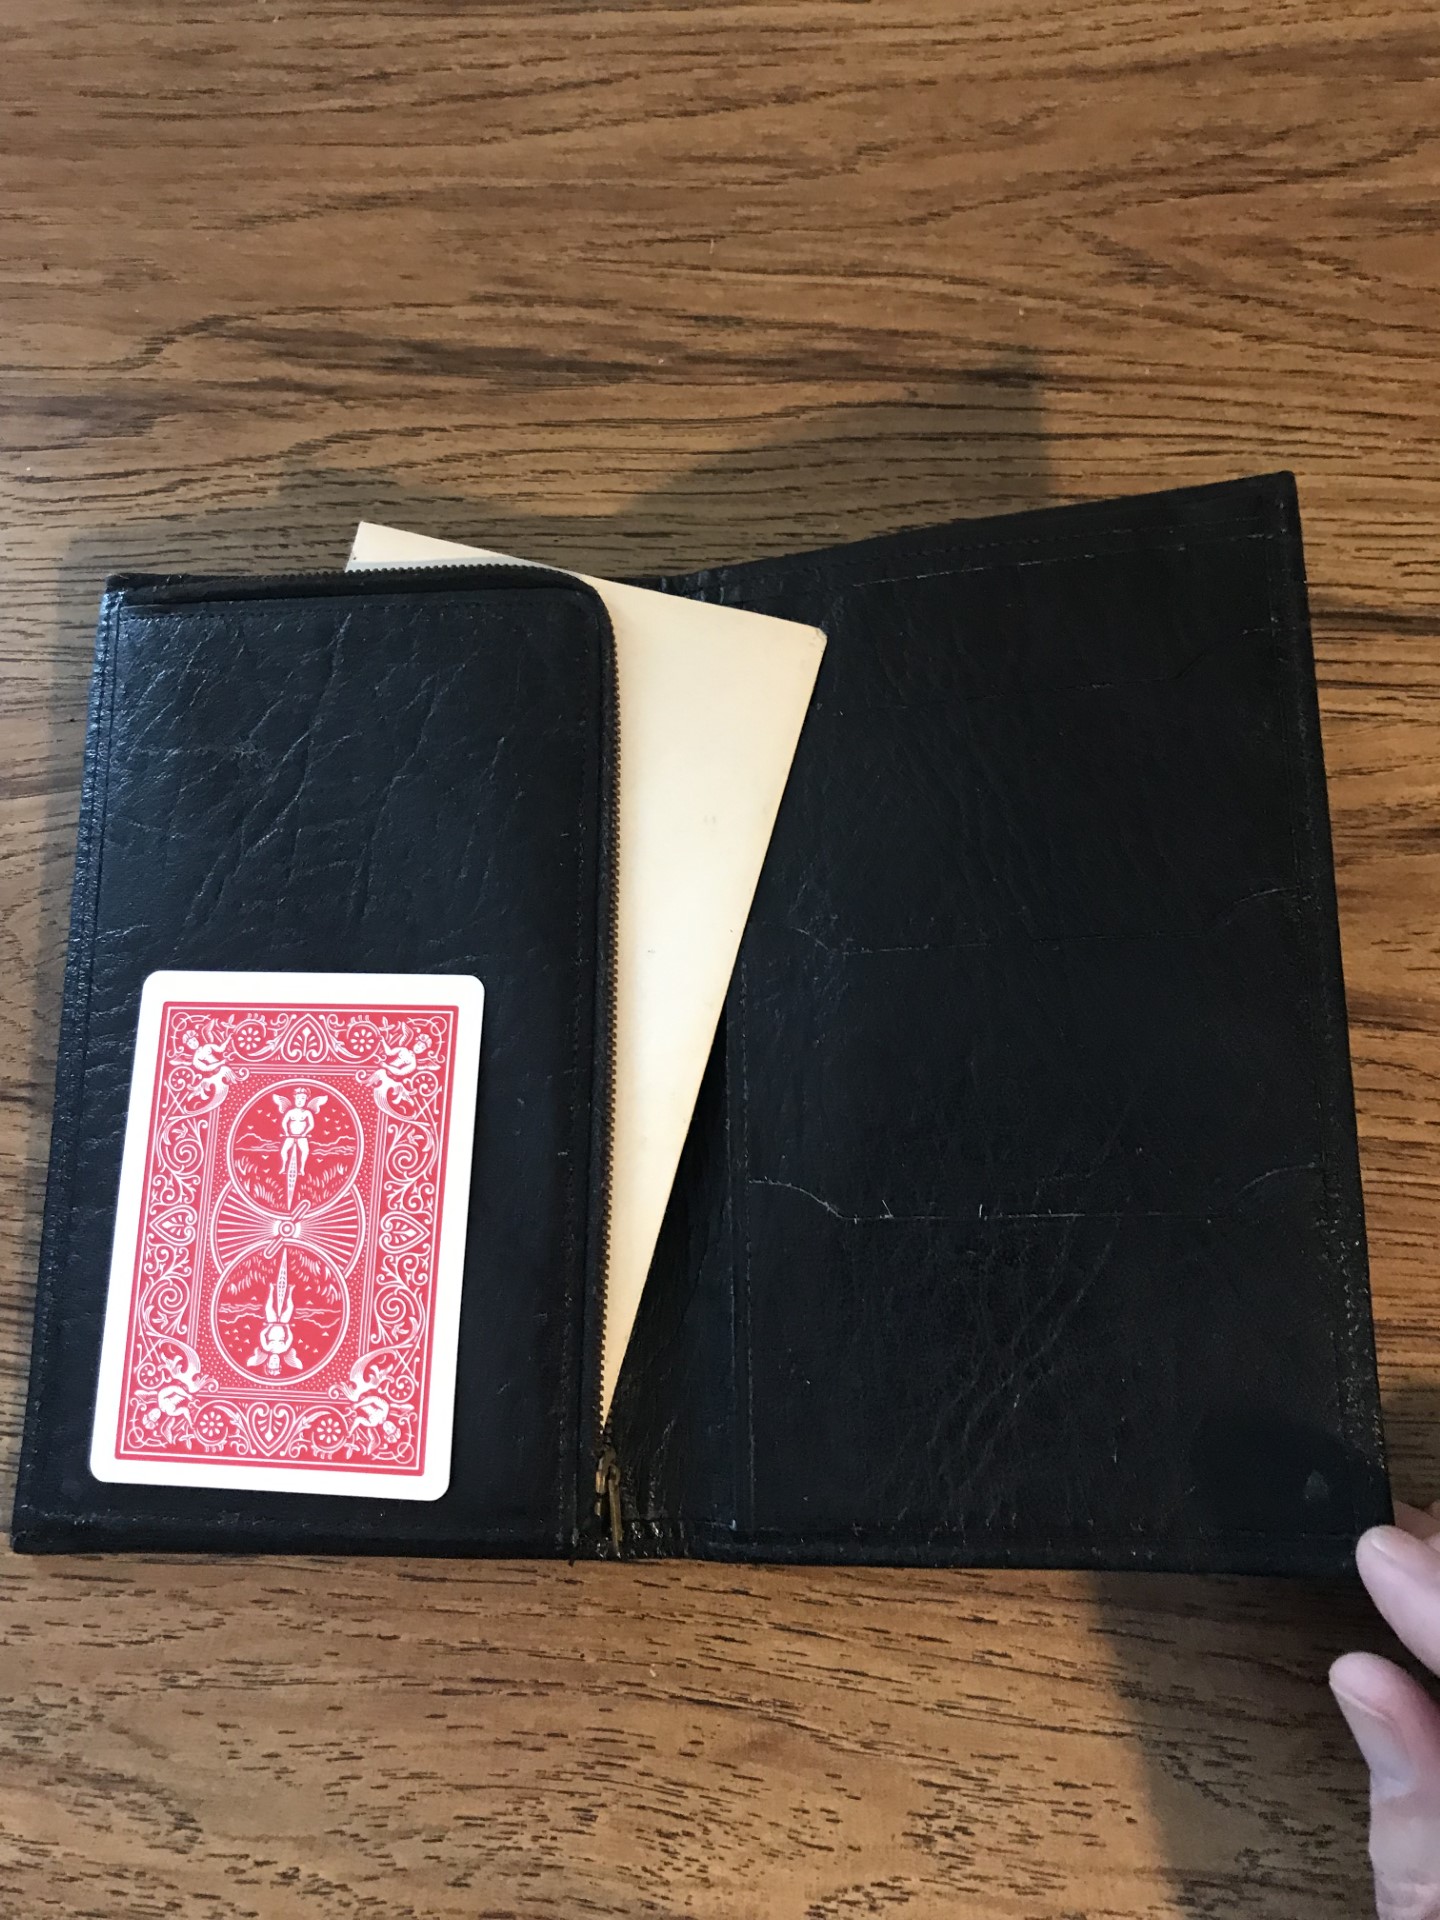 The LePaul "Card in Wallet" (Larry Jennings Version) by Lee Noble with envelope poking out and red Bicycle playing card on top